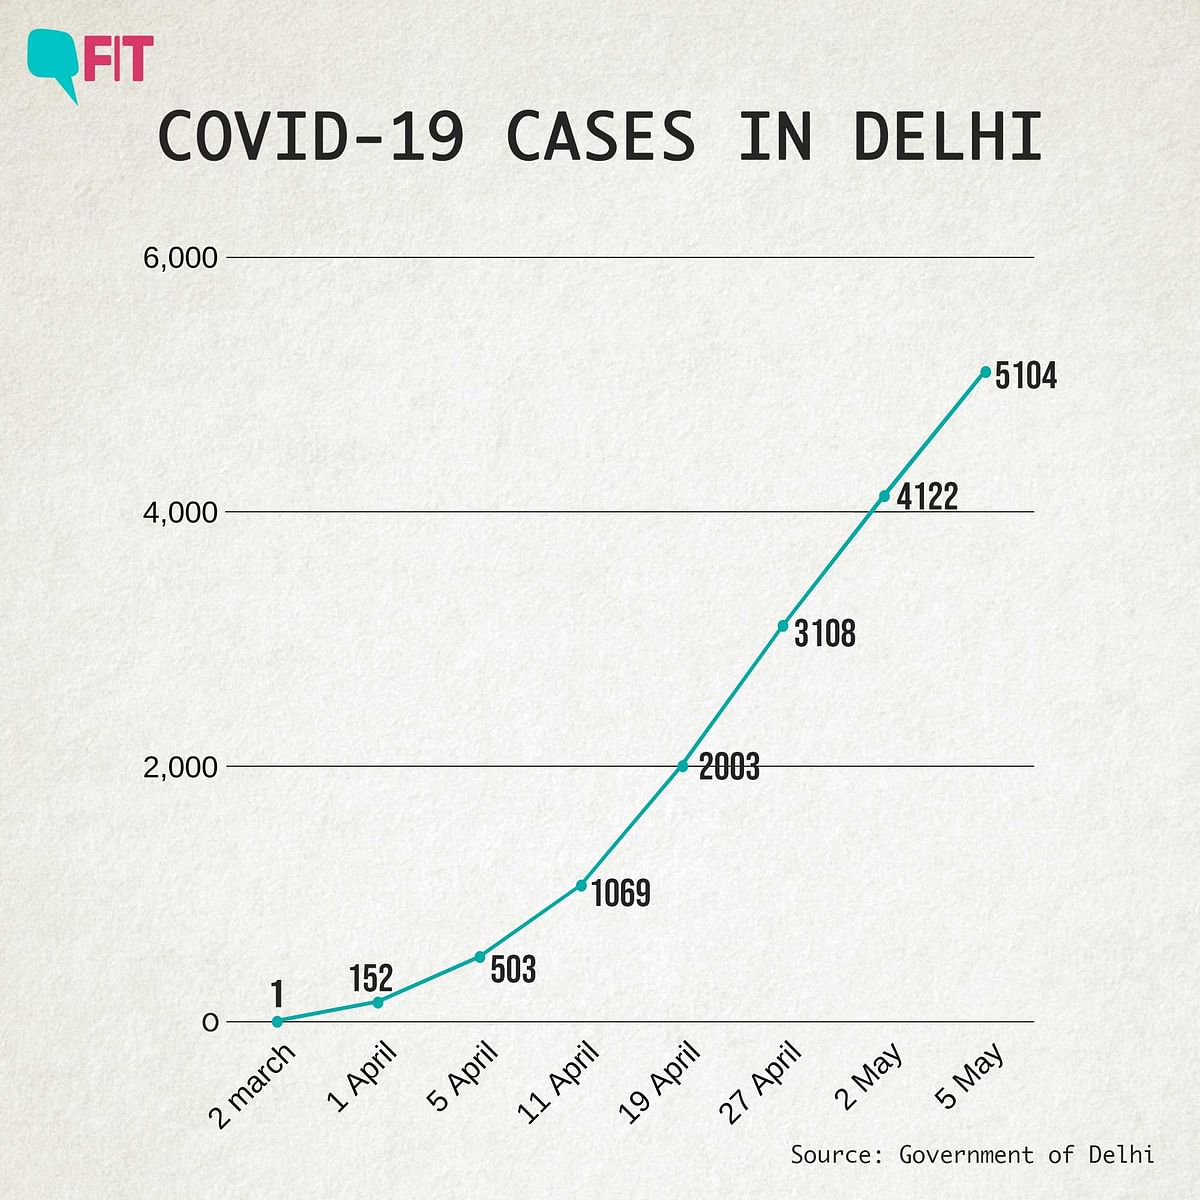 Is Delhi Prepared to Reopen As New COVID-19 Cases Rise Sharply?